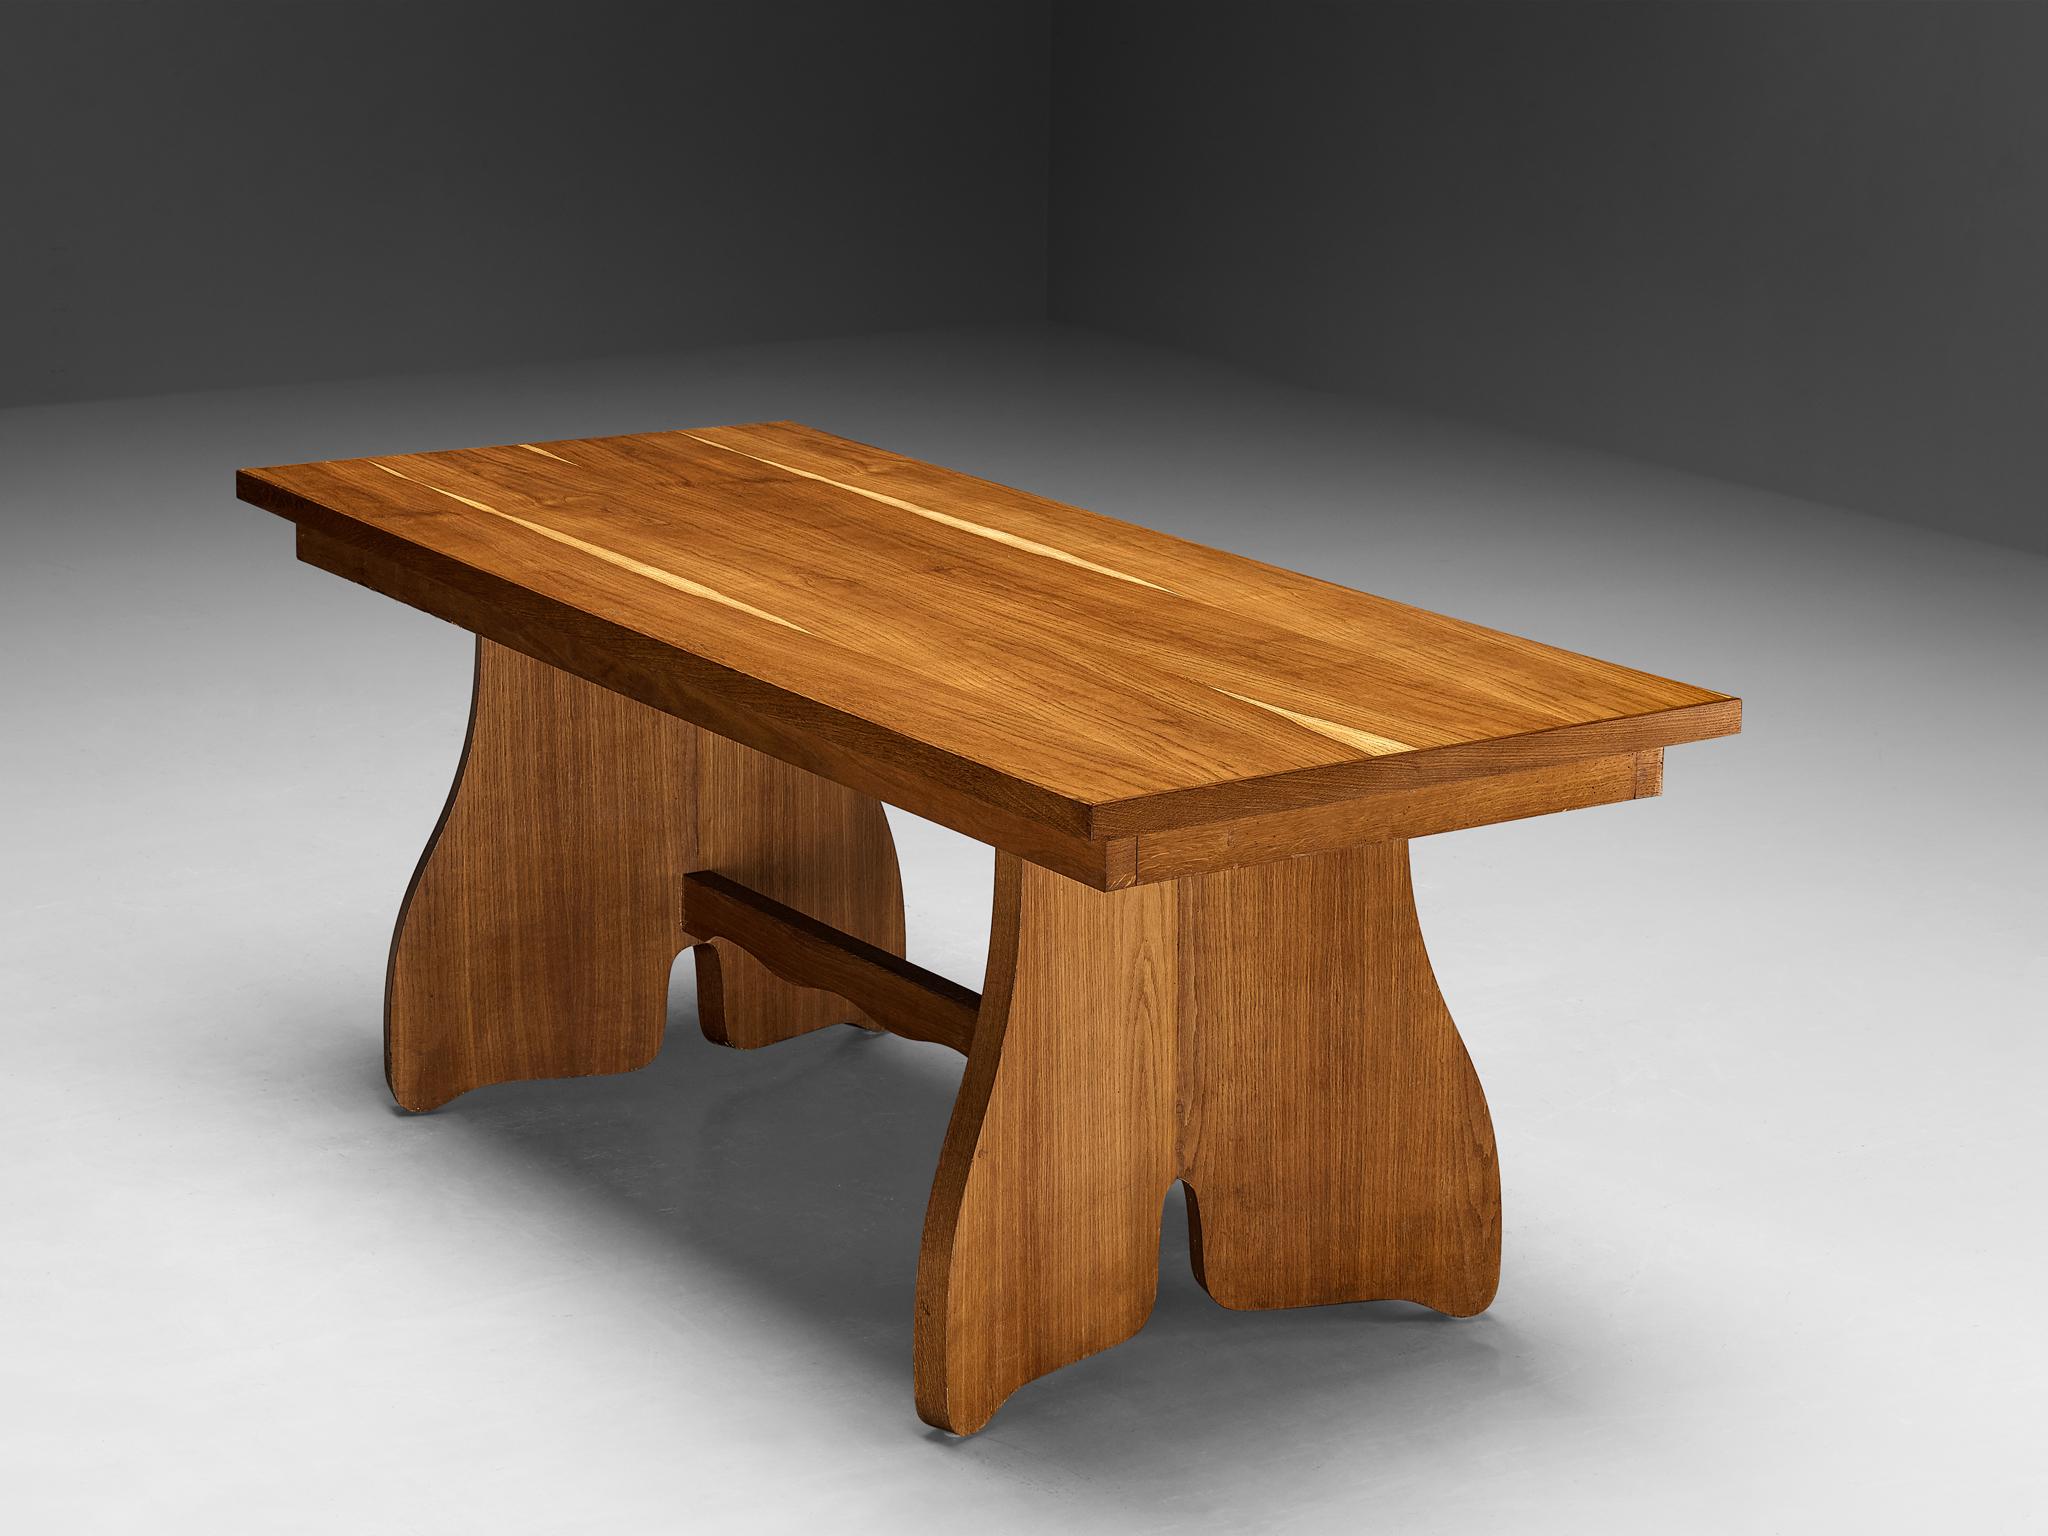 Paolo Buffa for Esposizione Permanente mobili Cantù, dining table, oak, Italy, 1940s

A truly remarkable piece of furniture that excels in every aspect of design: from its impeccable execution and charmingly crafted carvings to its craftsmanship and